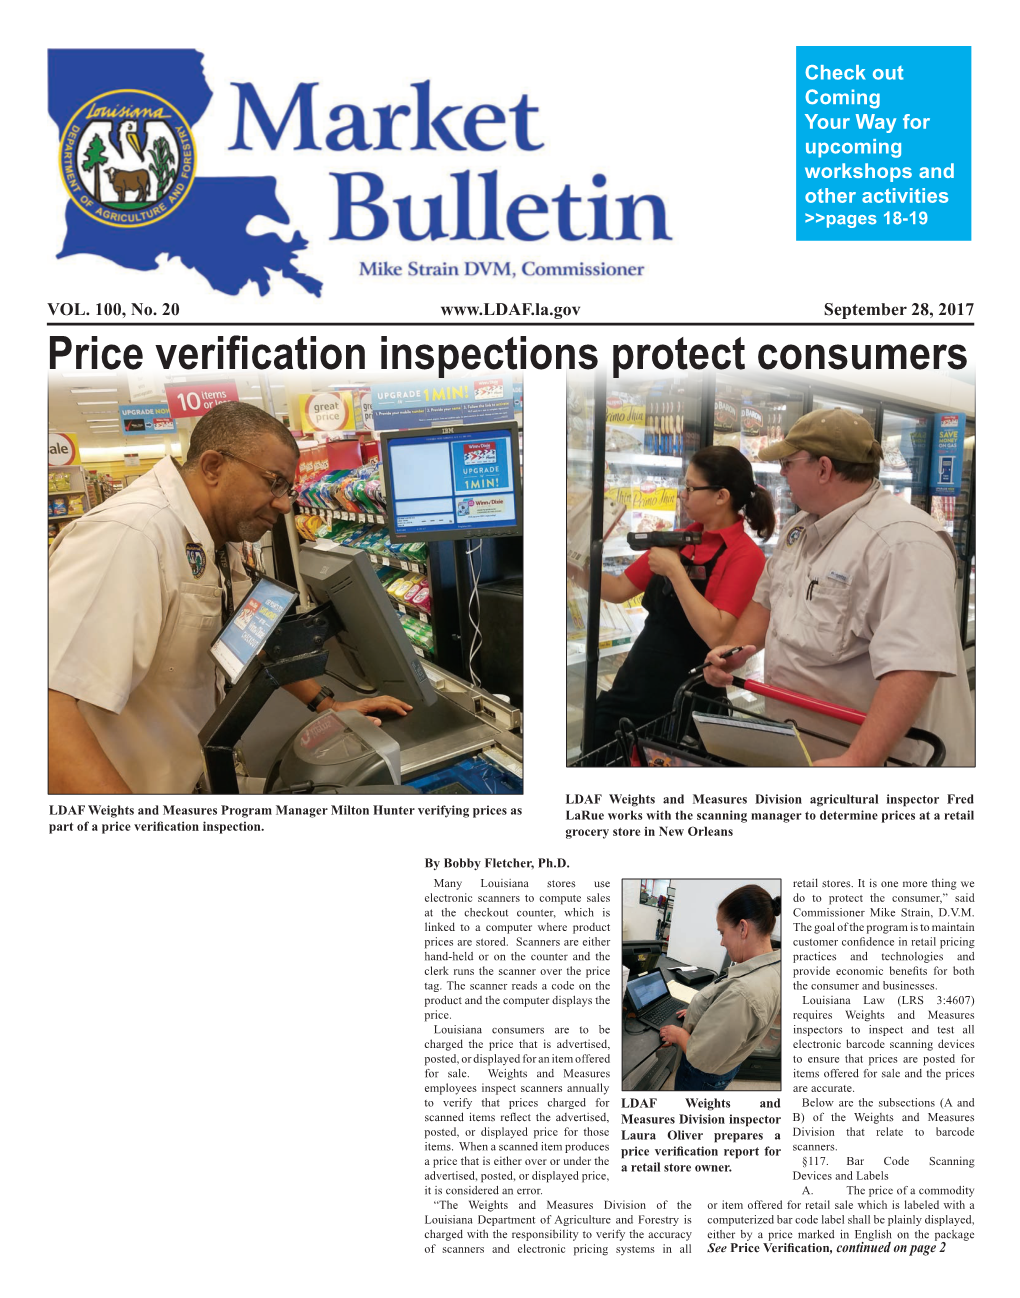 Price Verification Inspections Protect Consumers